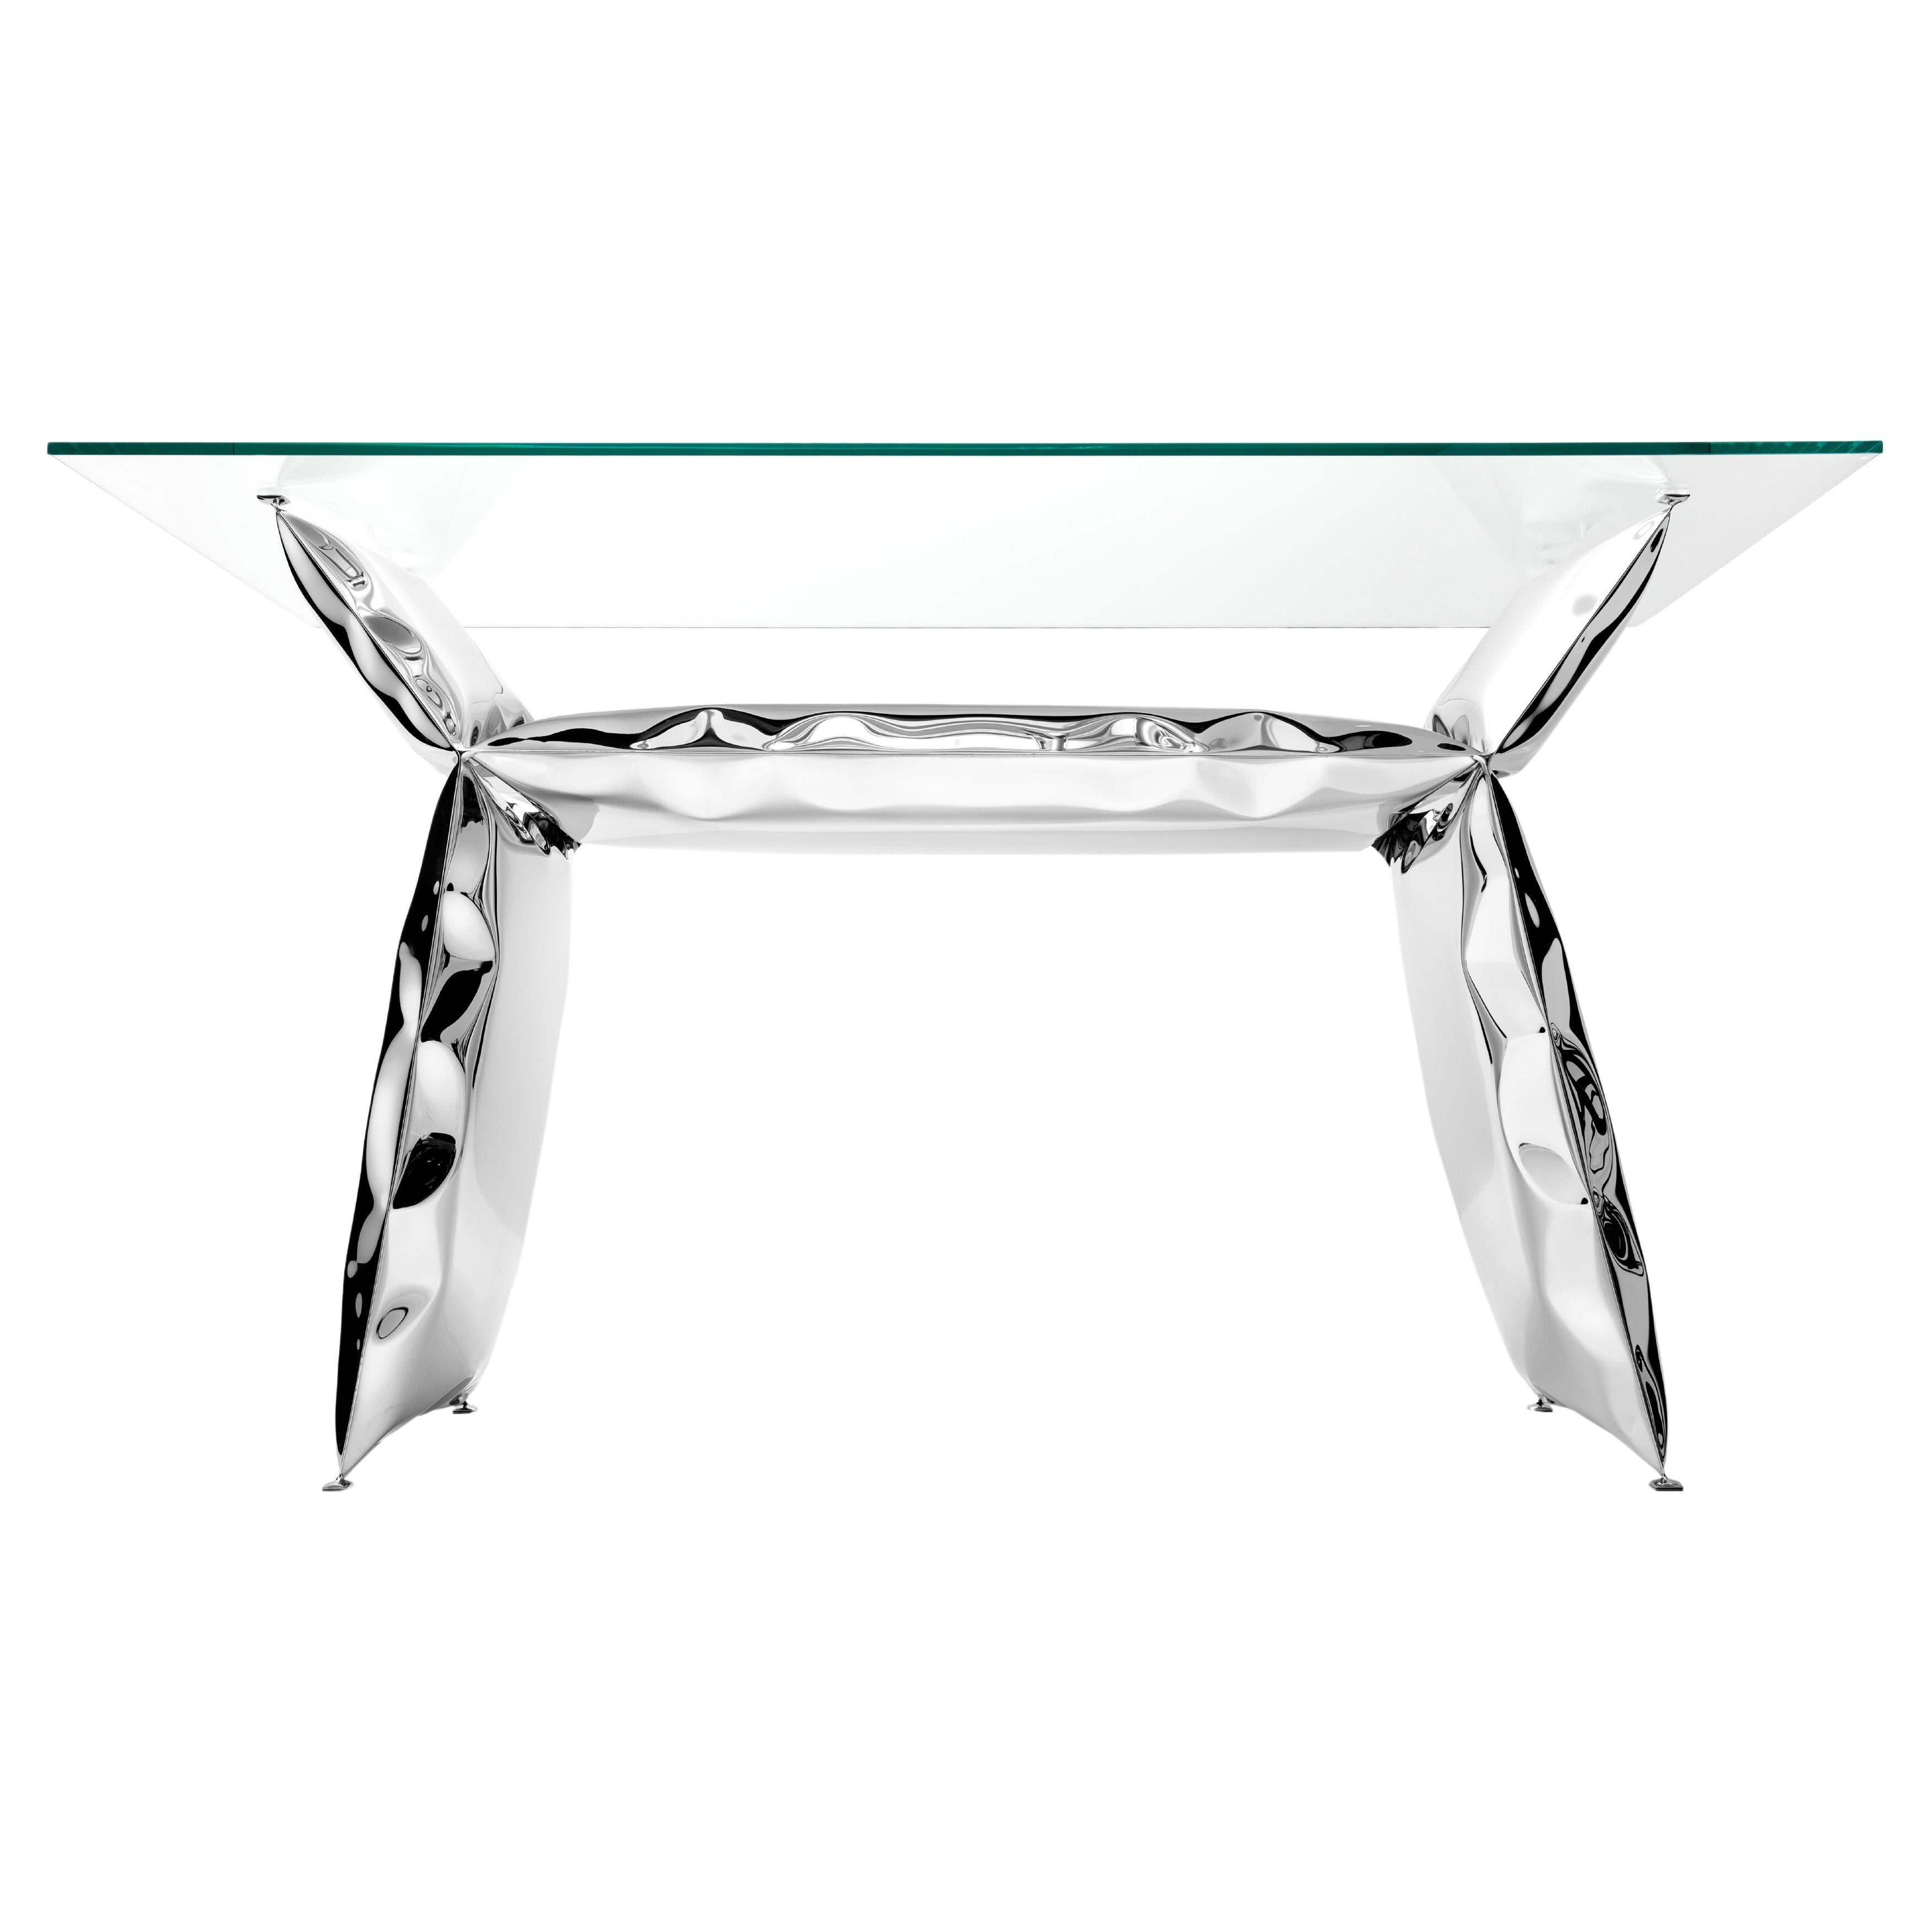 'Balance' inflated metal console table, stainless steel and glass